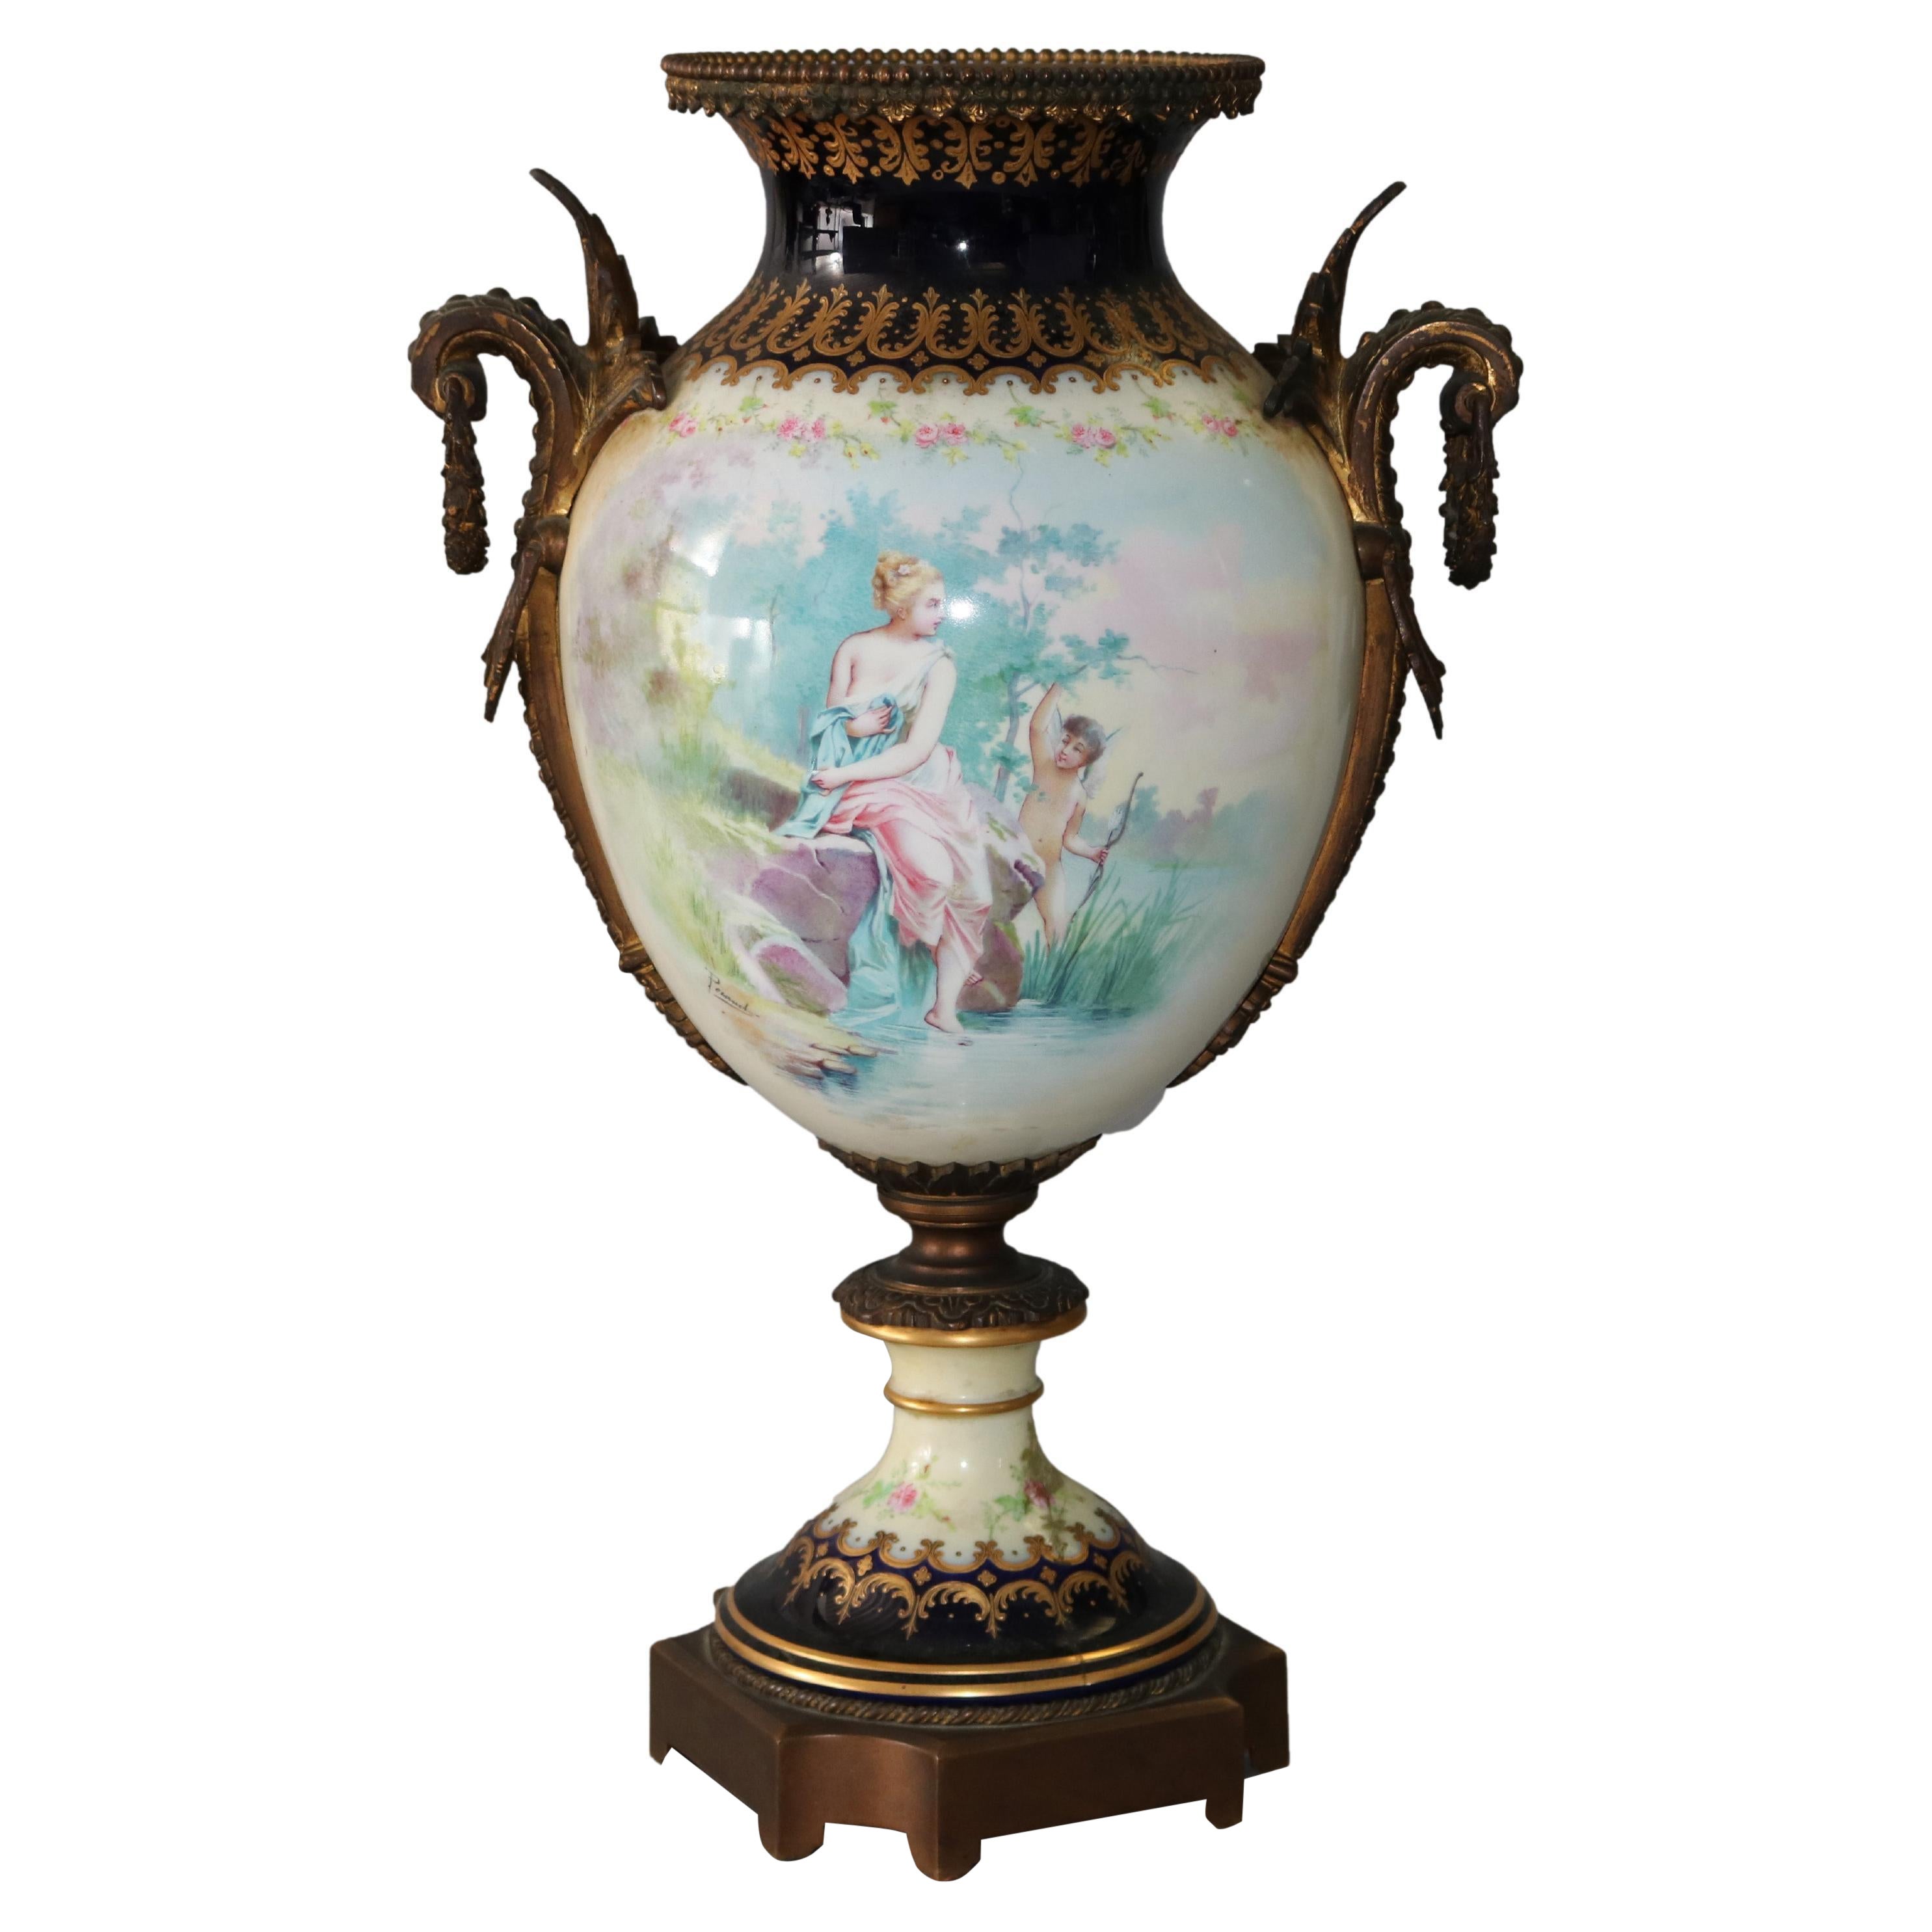 Large Antique French Atttr Sevres Hand Painted Porcelain & Ormolu Urn 19th C